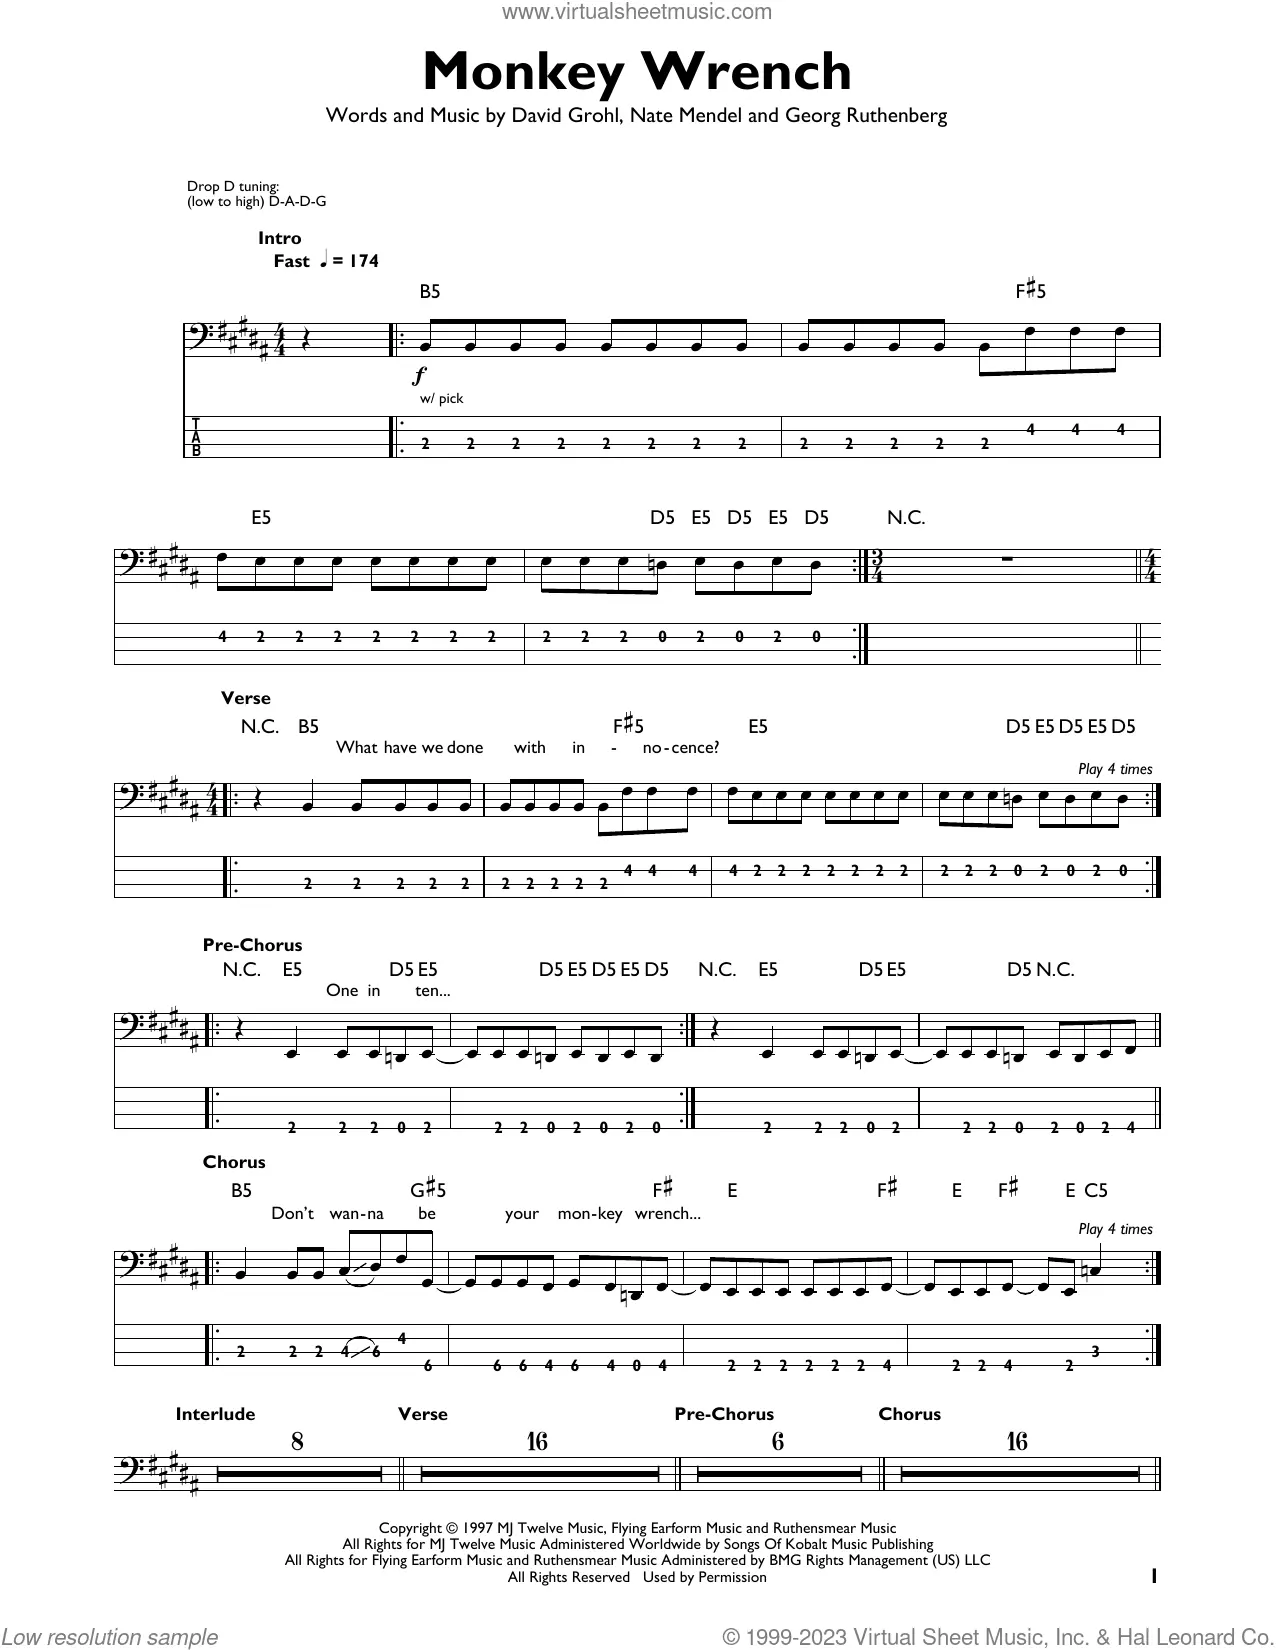 Learn to fly – Foo Fighters Sheet music for Piano (Solo)